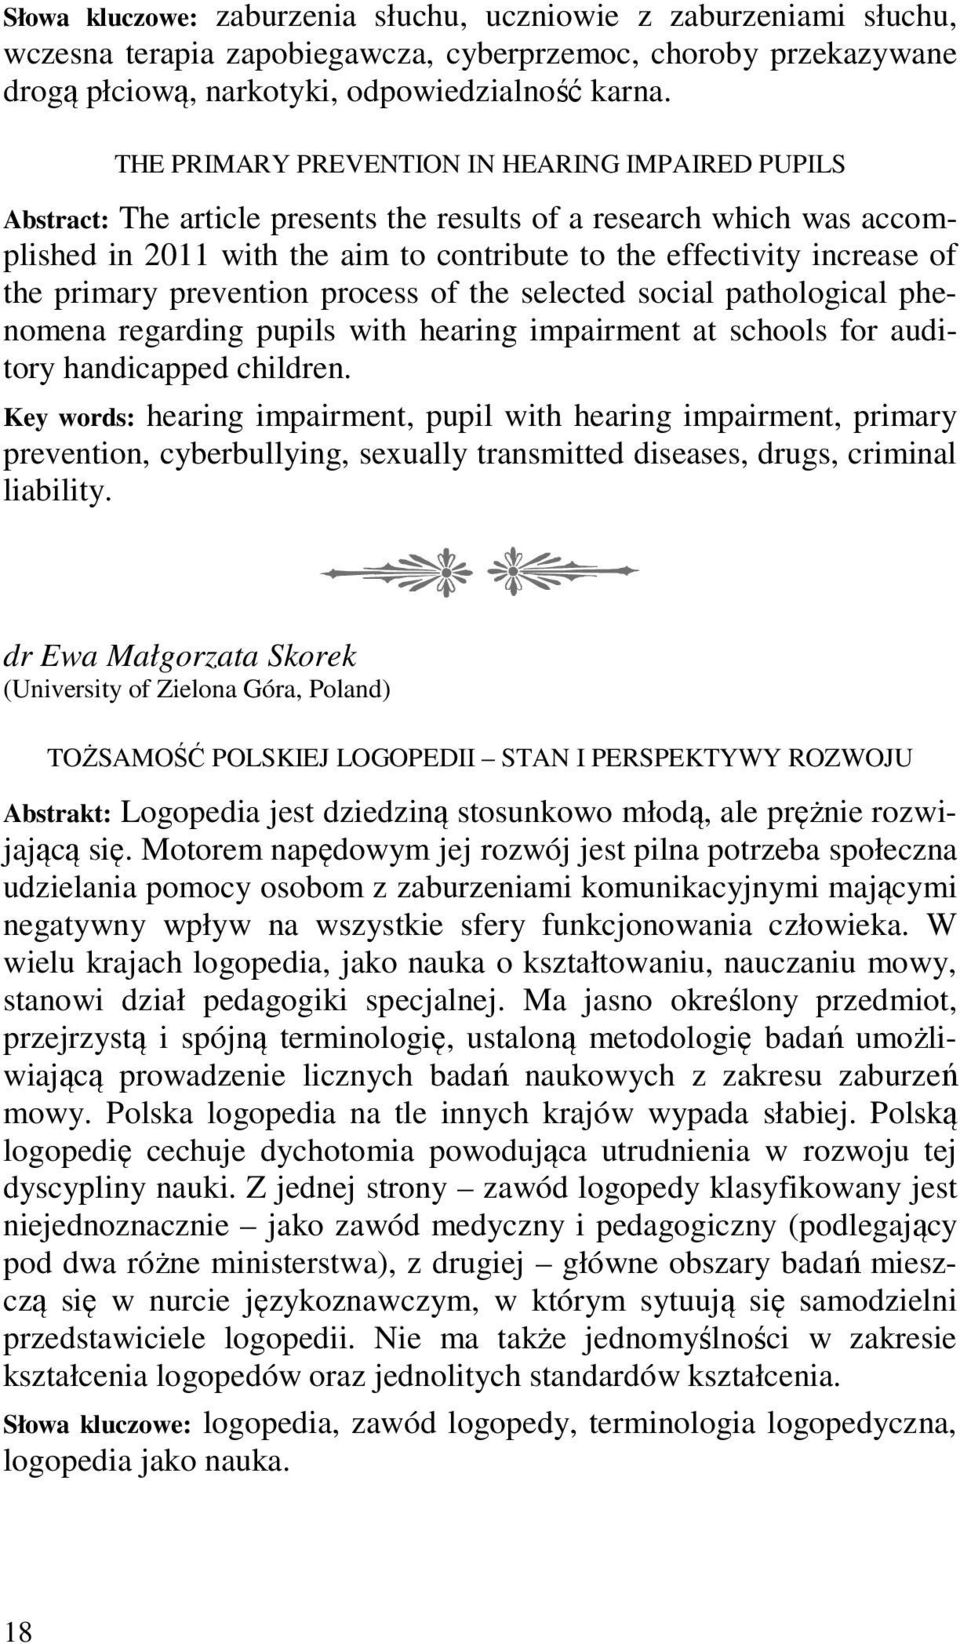 primary prevention process of the selected social pathological phenomena regarding pupils with hearing impairment at schools for auditory handicapped children.